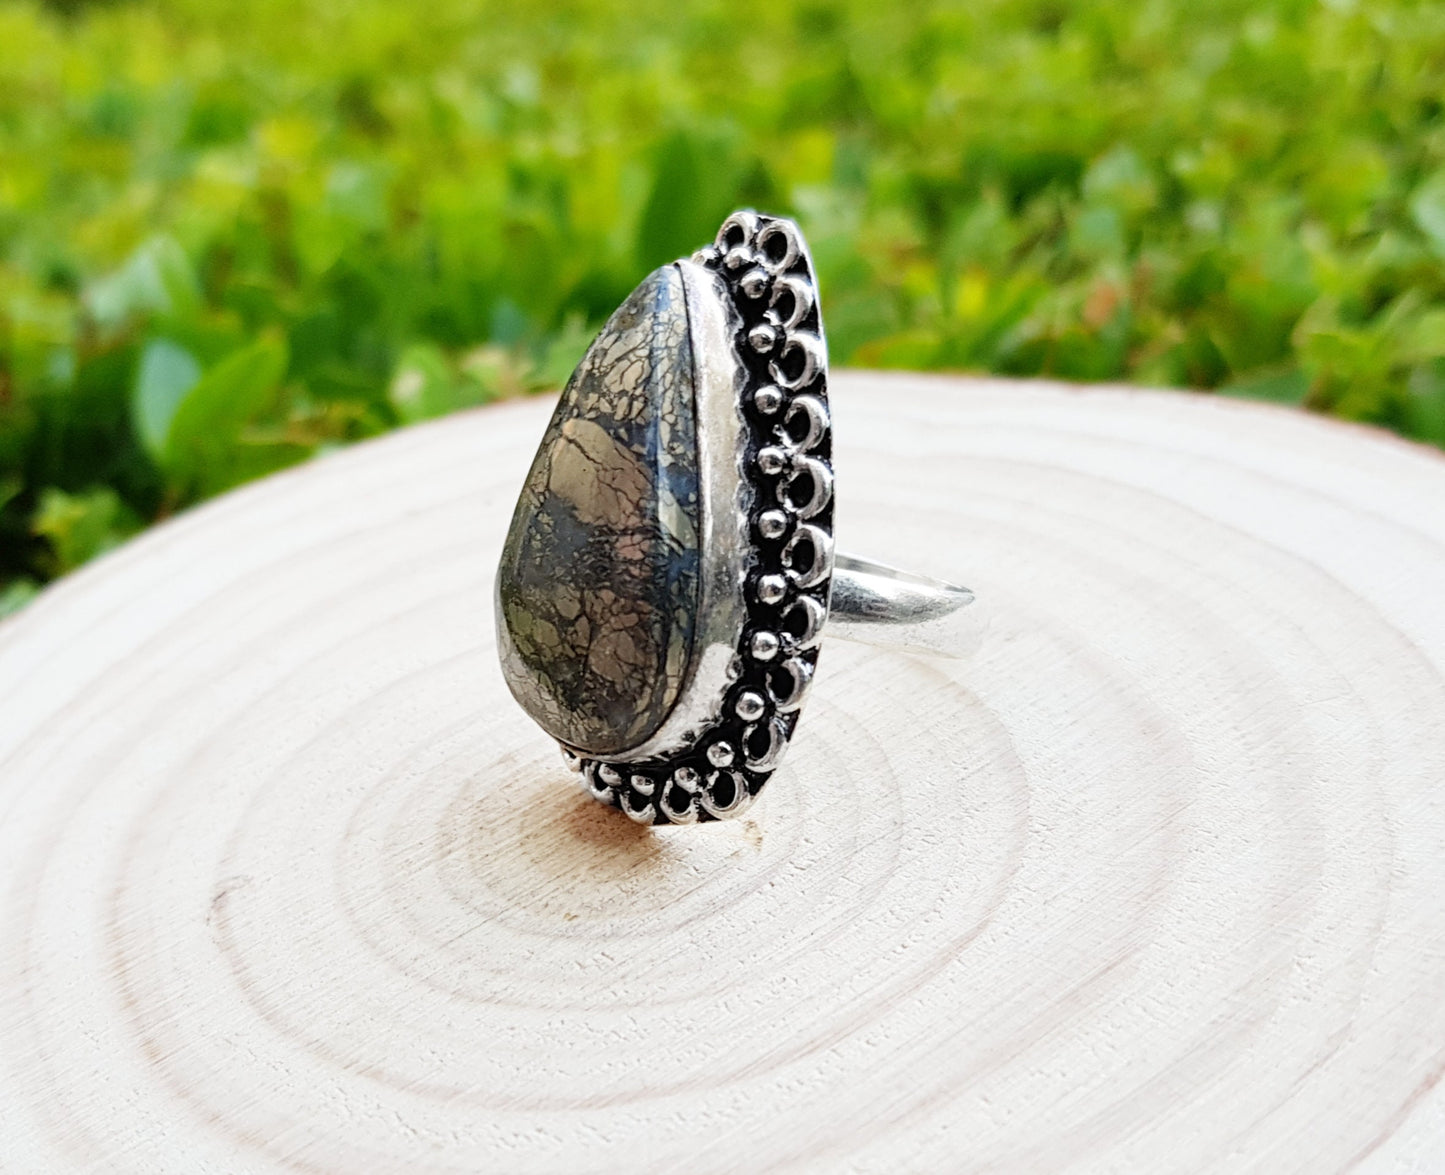 Apache Gold Pyrite Statement Ring Size US 9 Sterling Silver Gemstone Ring Boho Rings GypsyJewellery One Of A Kind Gift